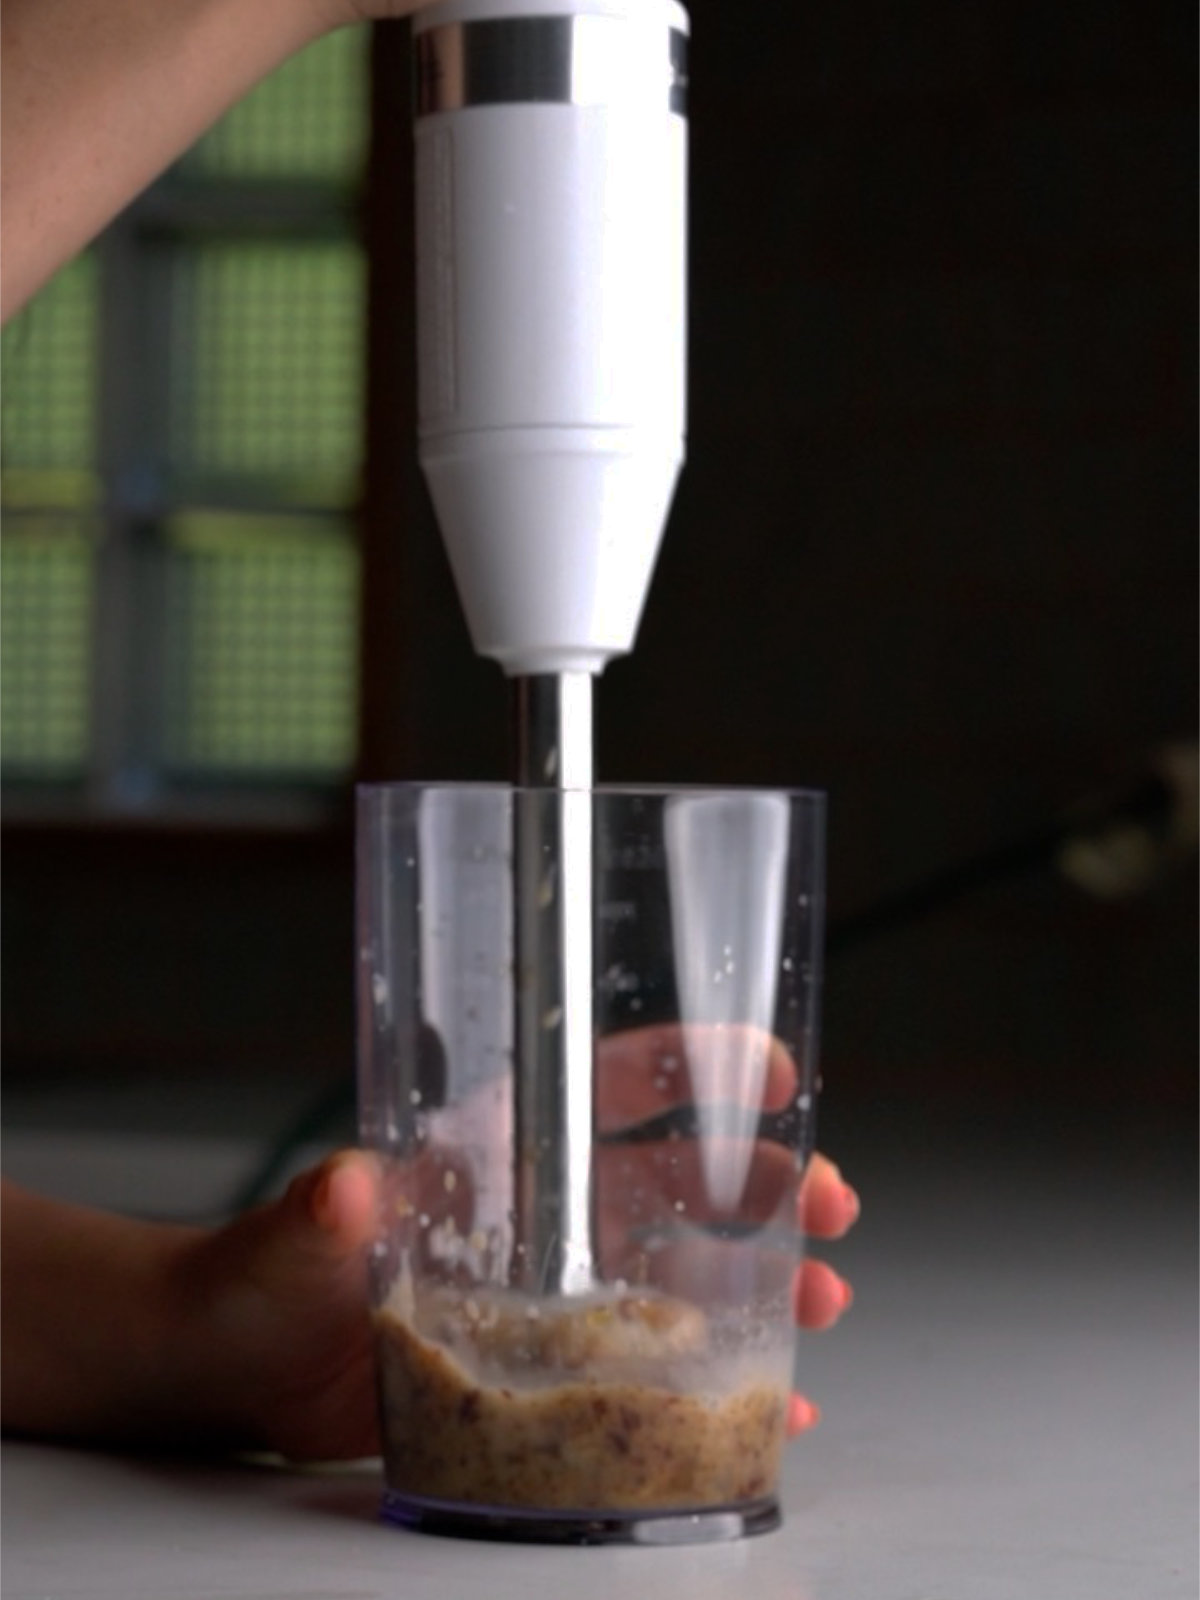 Immersion blender blending dates and a little milk in a clear container.